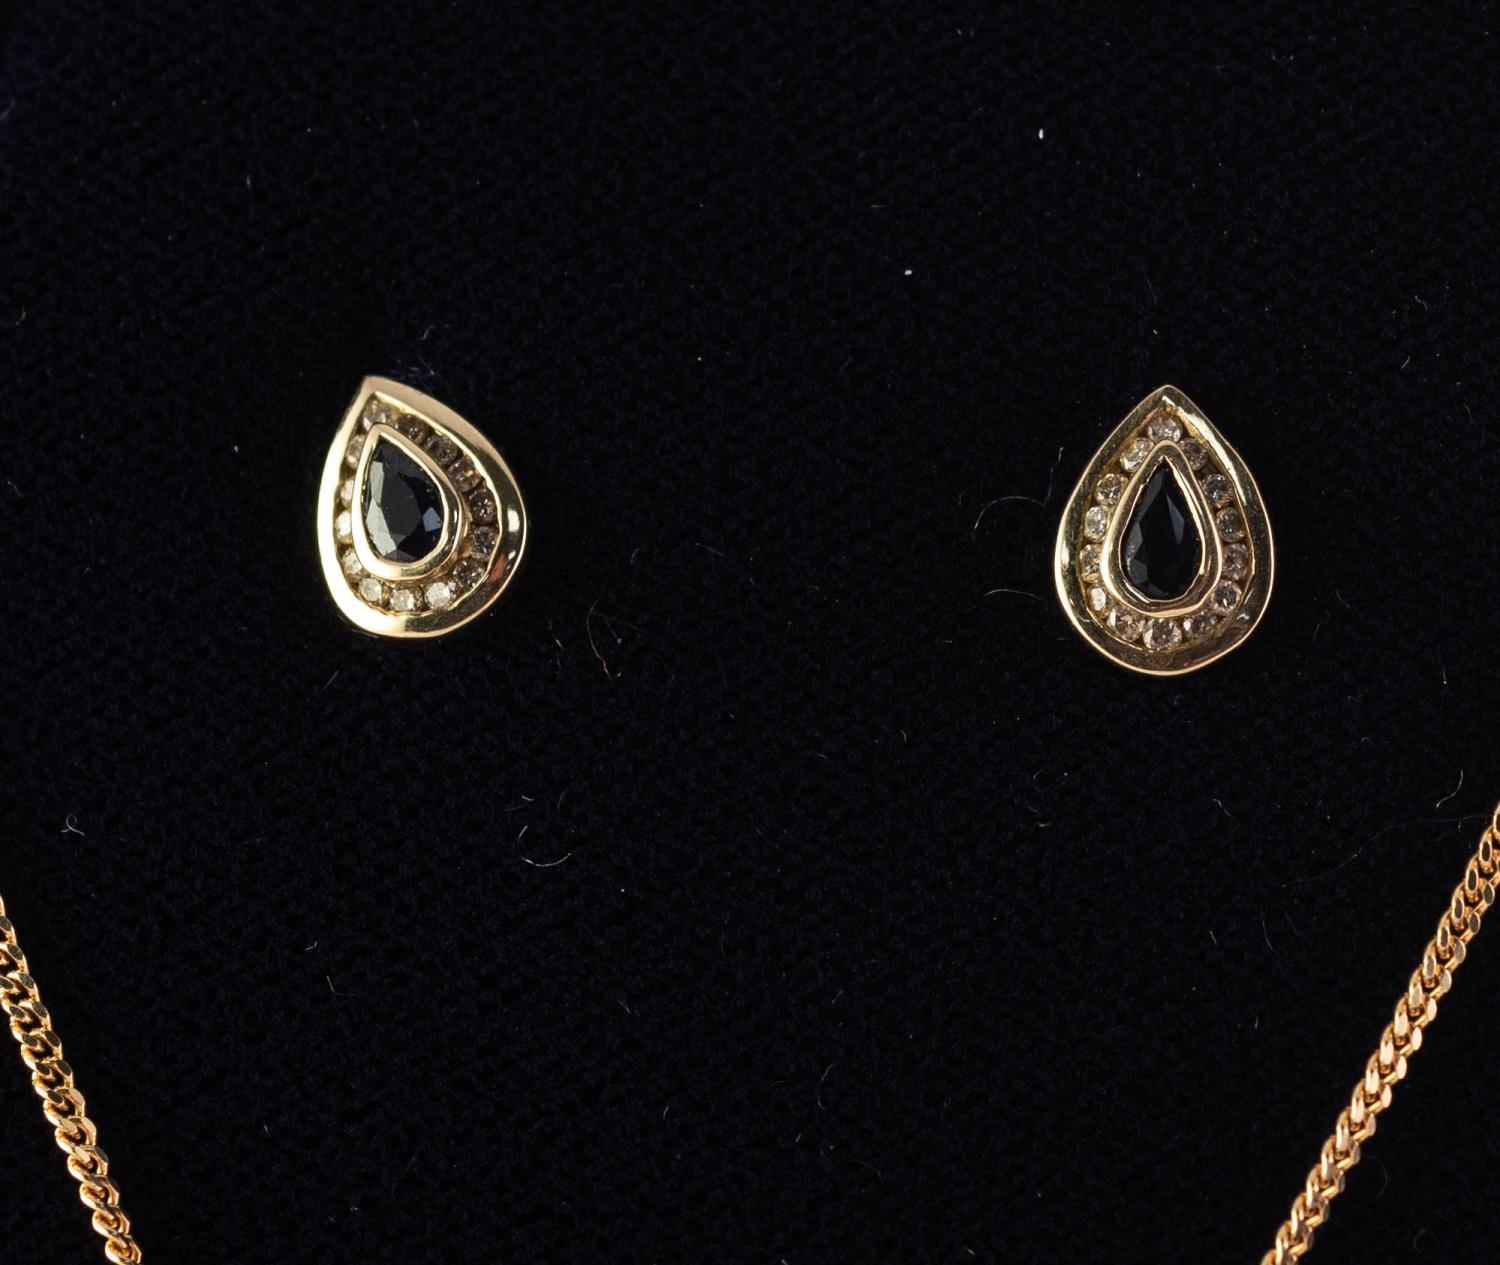 9ct GOLD CHAIN NECKLACE, 18in (46cm) long and the 9ct GOLD SMALL TEAR SHAPED PENDANT with a tear - Image 2 of 2